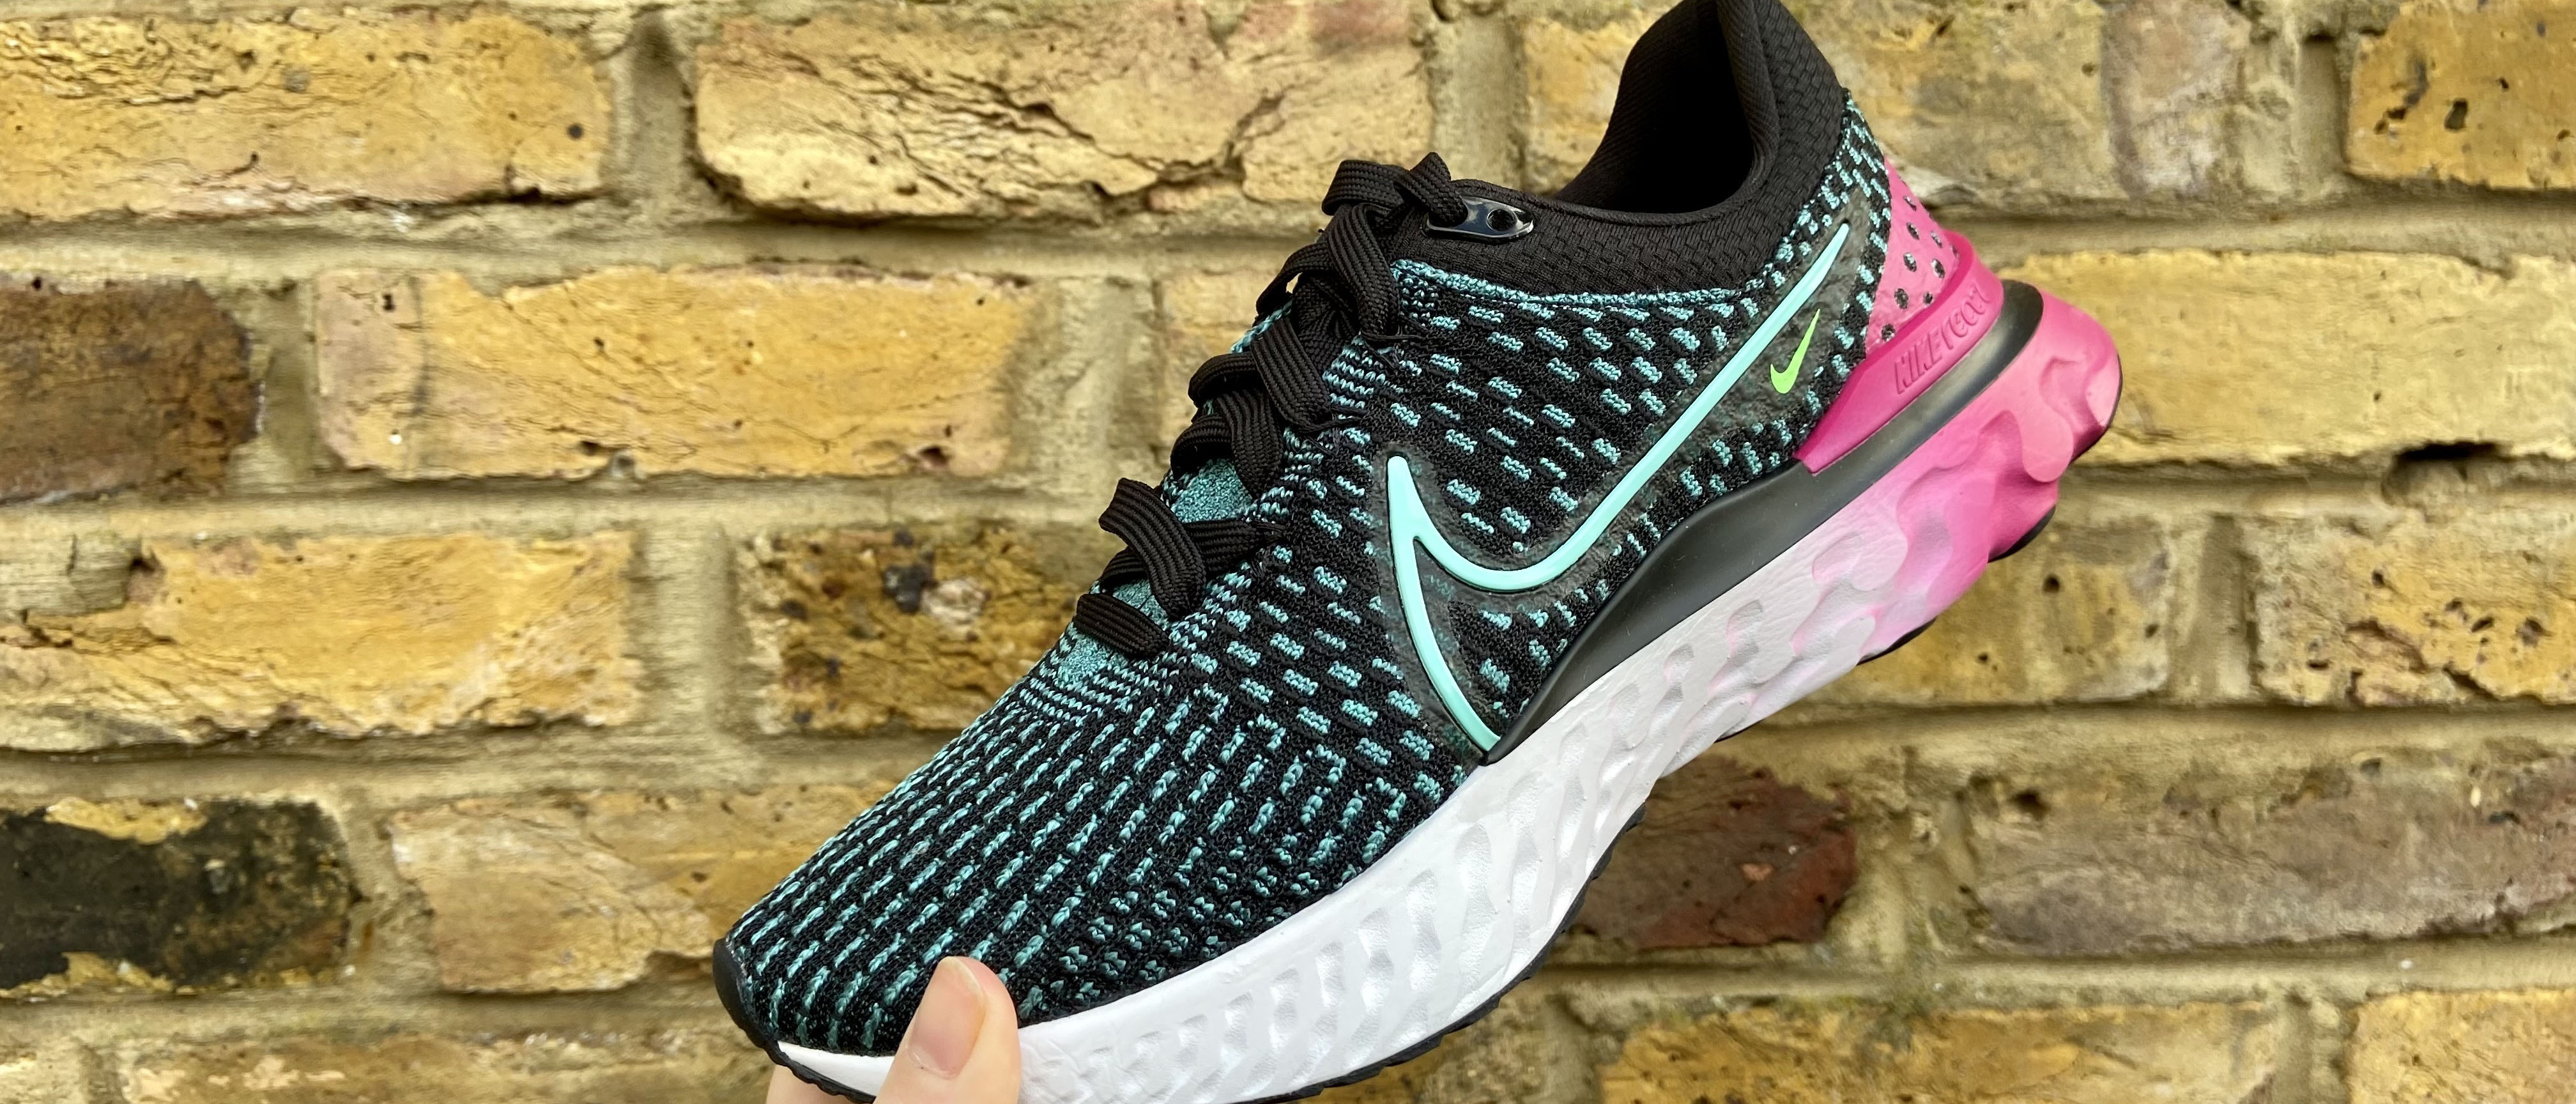 Nike React Infinity Flyknit 3 review | Tom's Guide